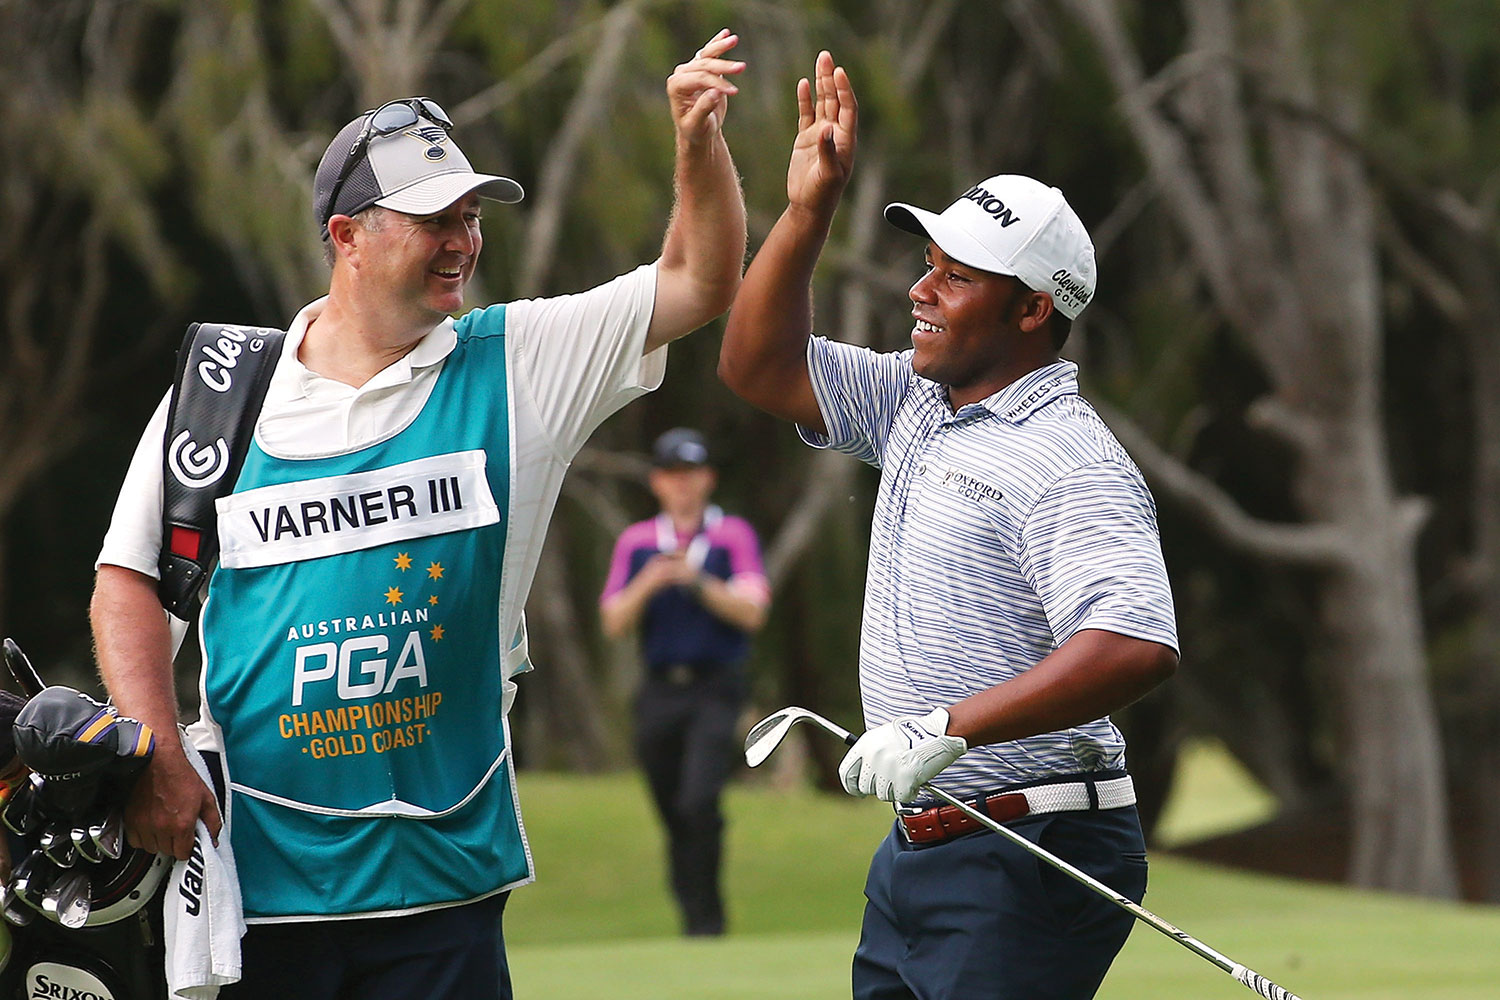 Varner now has a pair of top-two finishes at the Australian PGA.